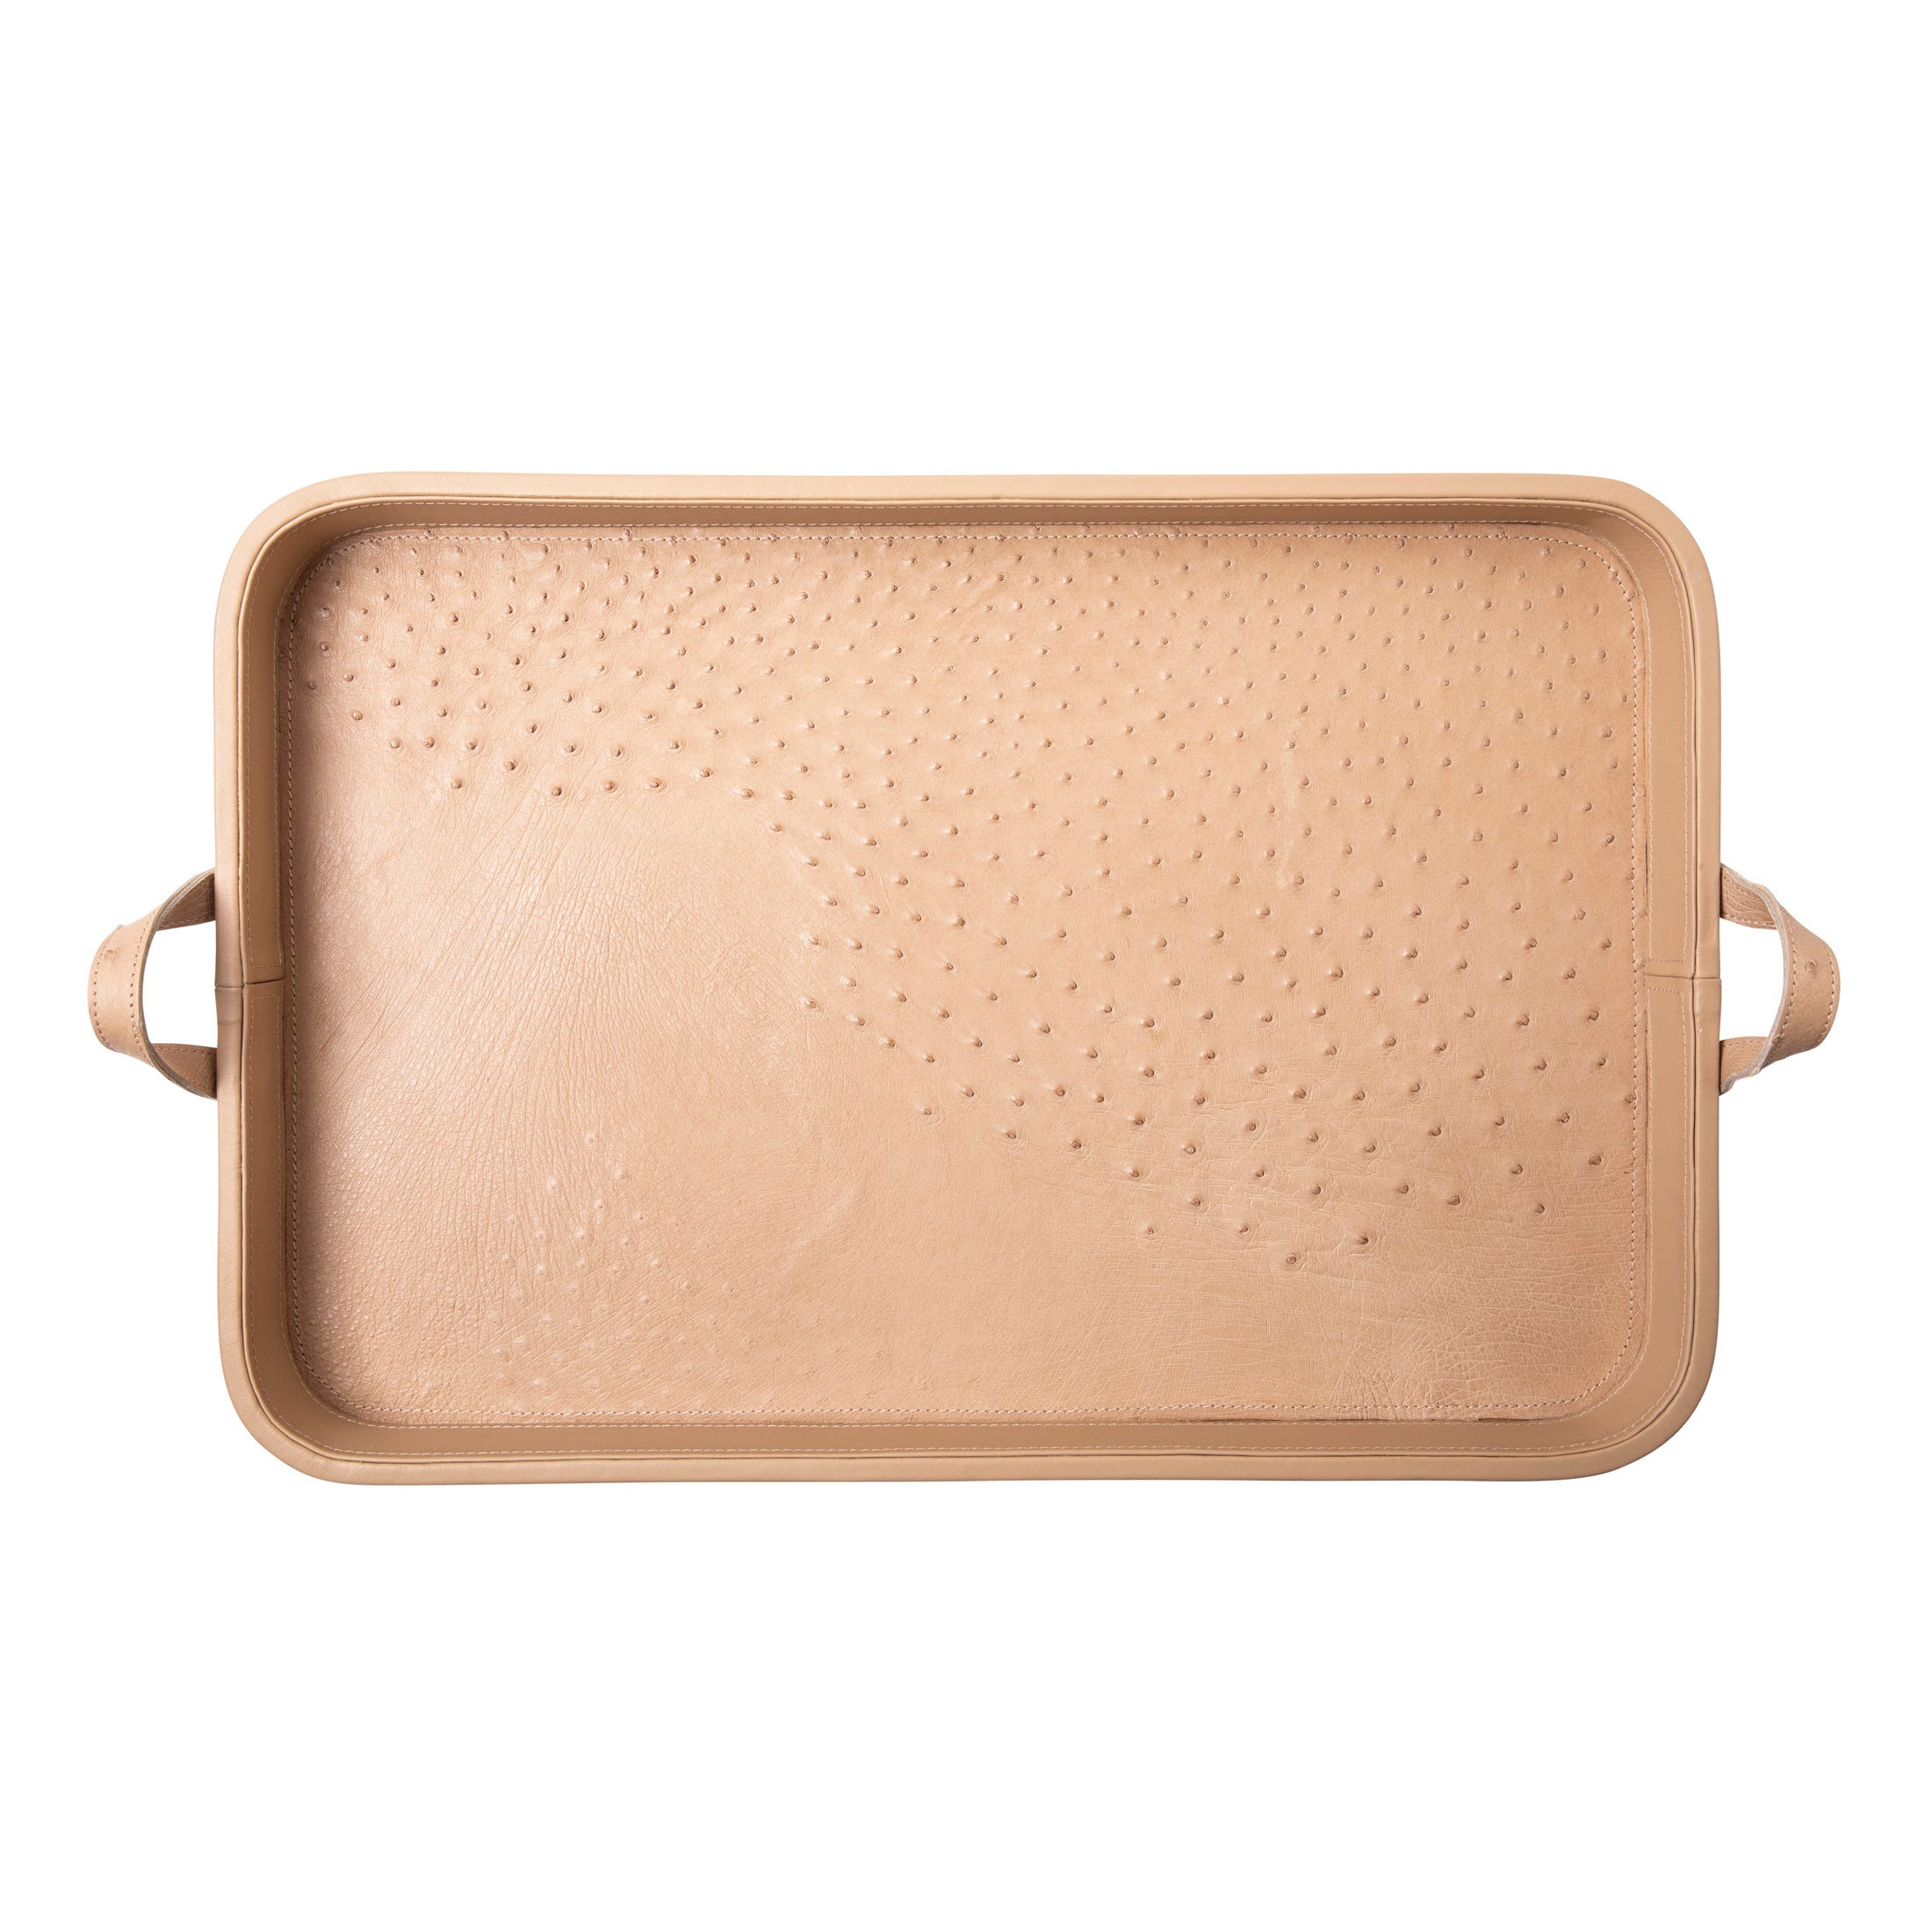 Ostrich Leather Inlay Tray - Cream